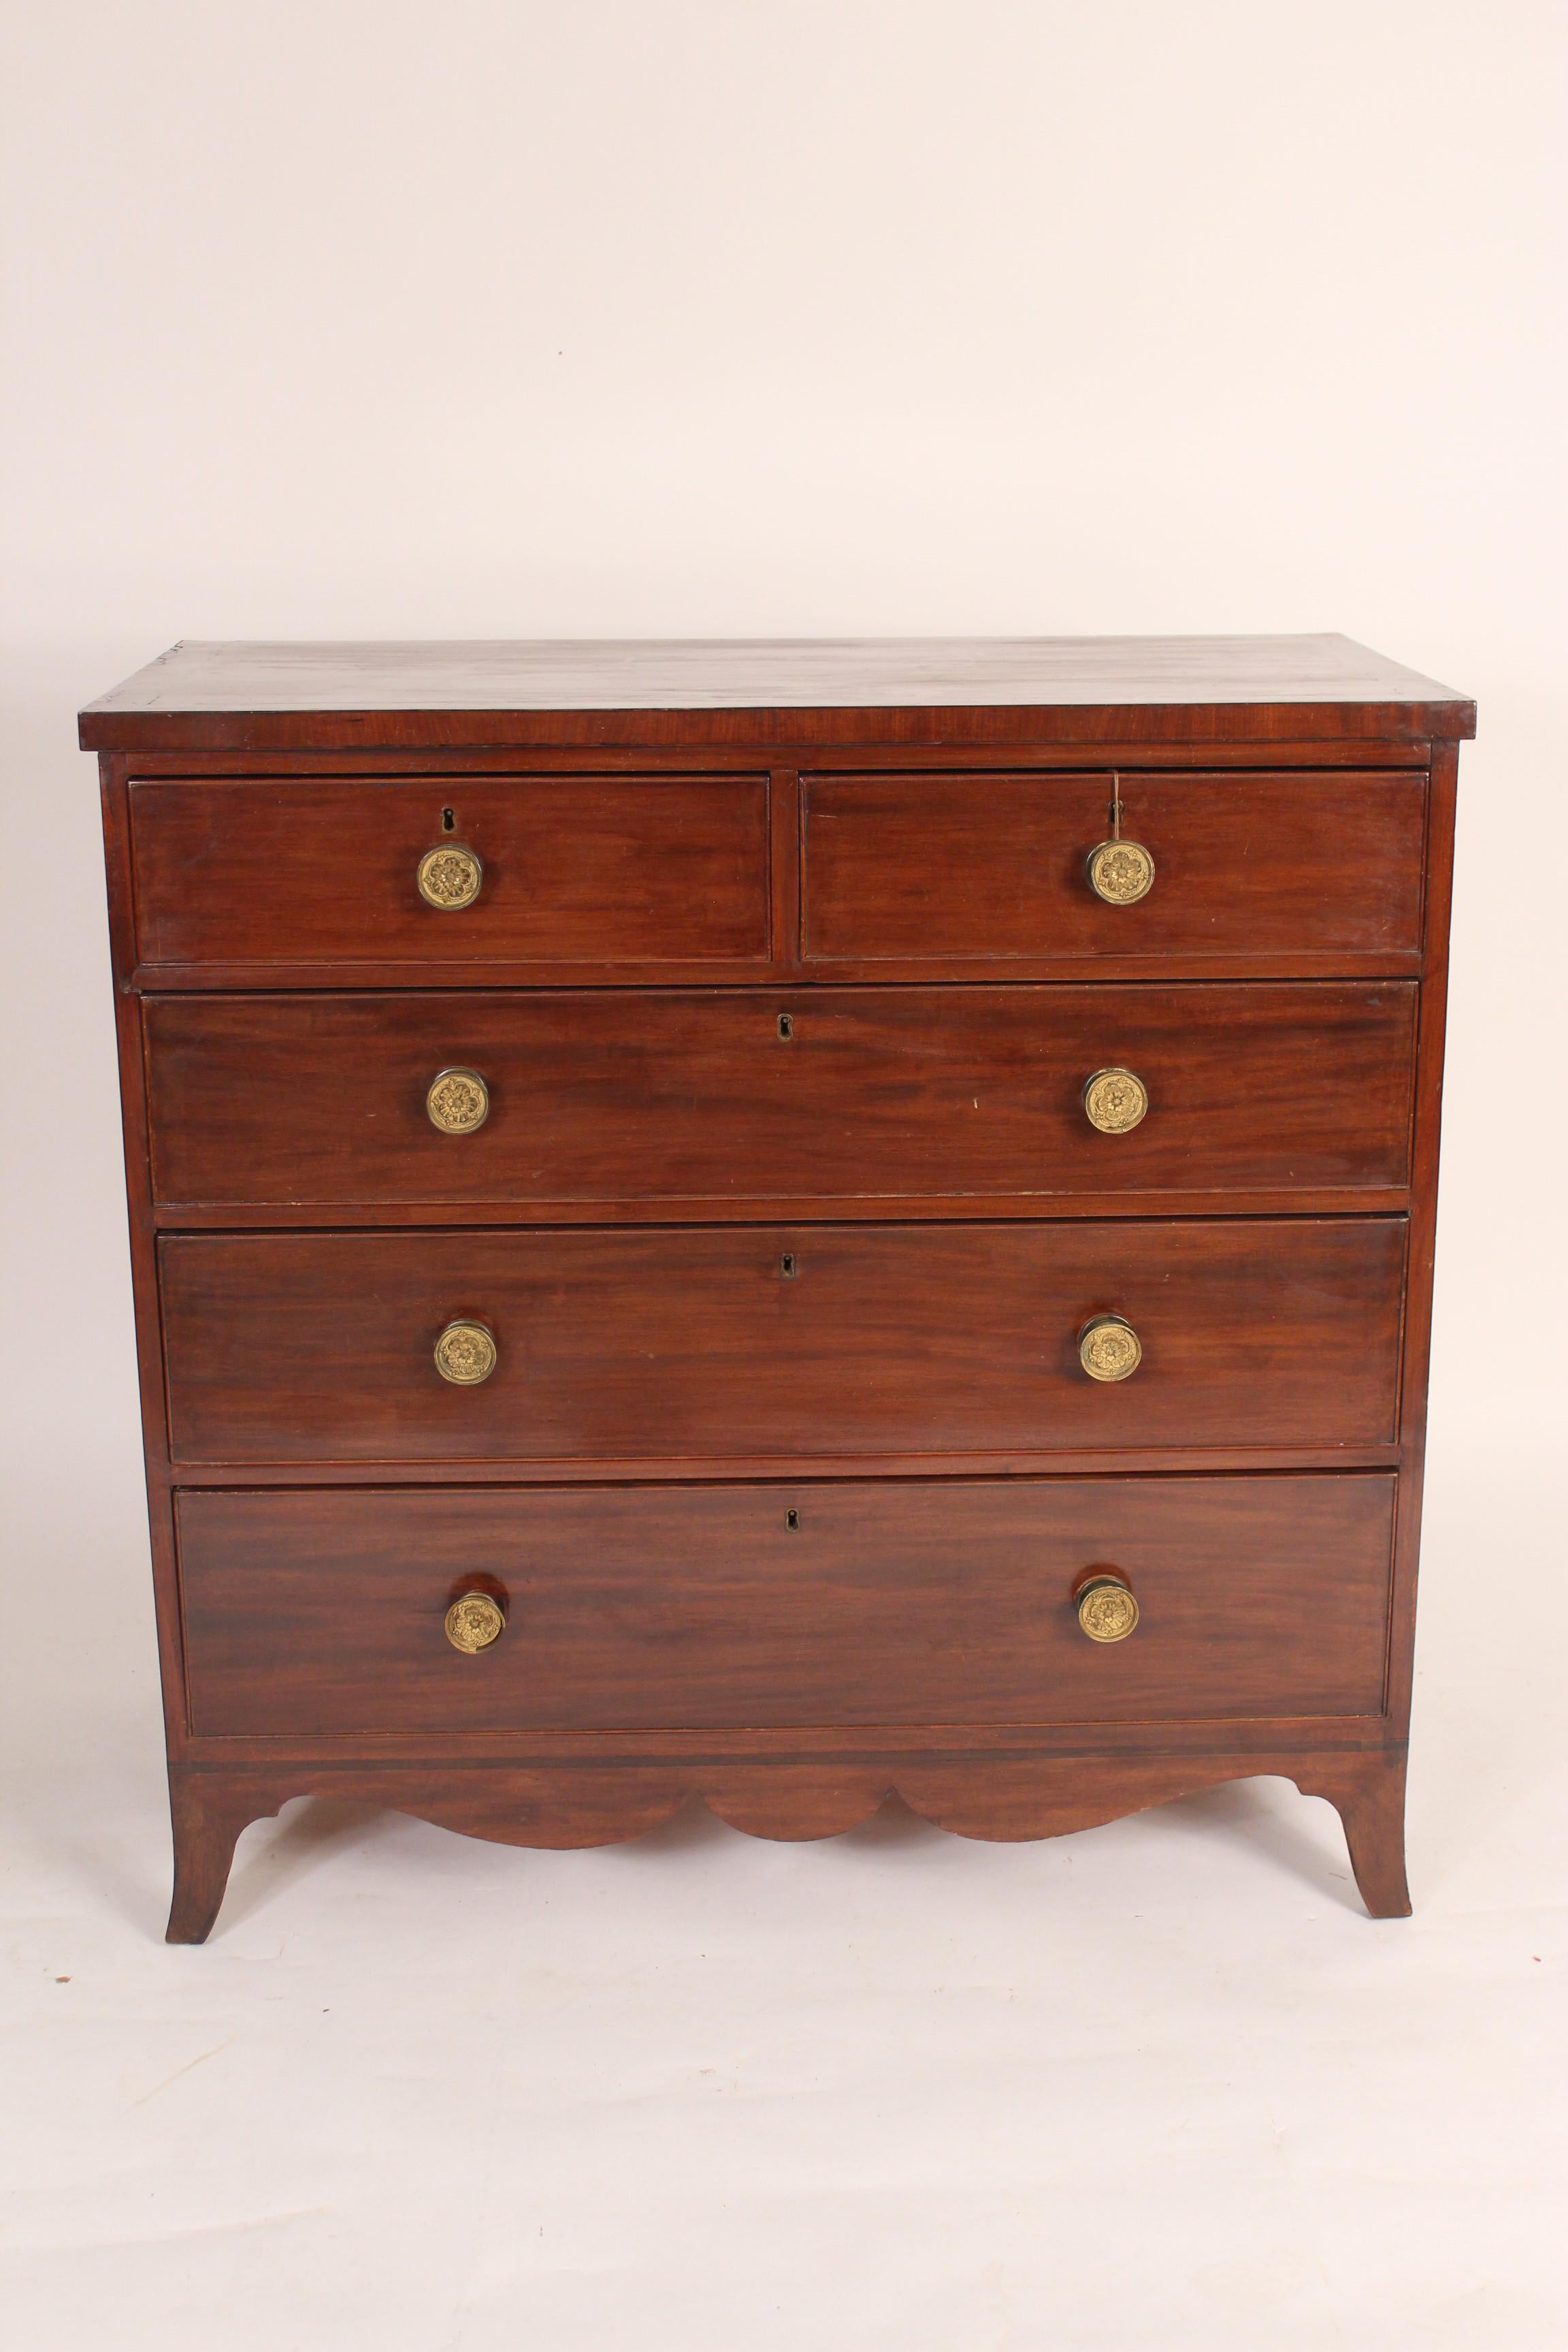 George III mahogany chest of drawers with a scalloped apron and crossbanded top, early 19th century.